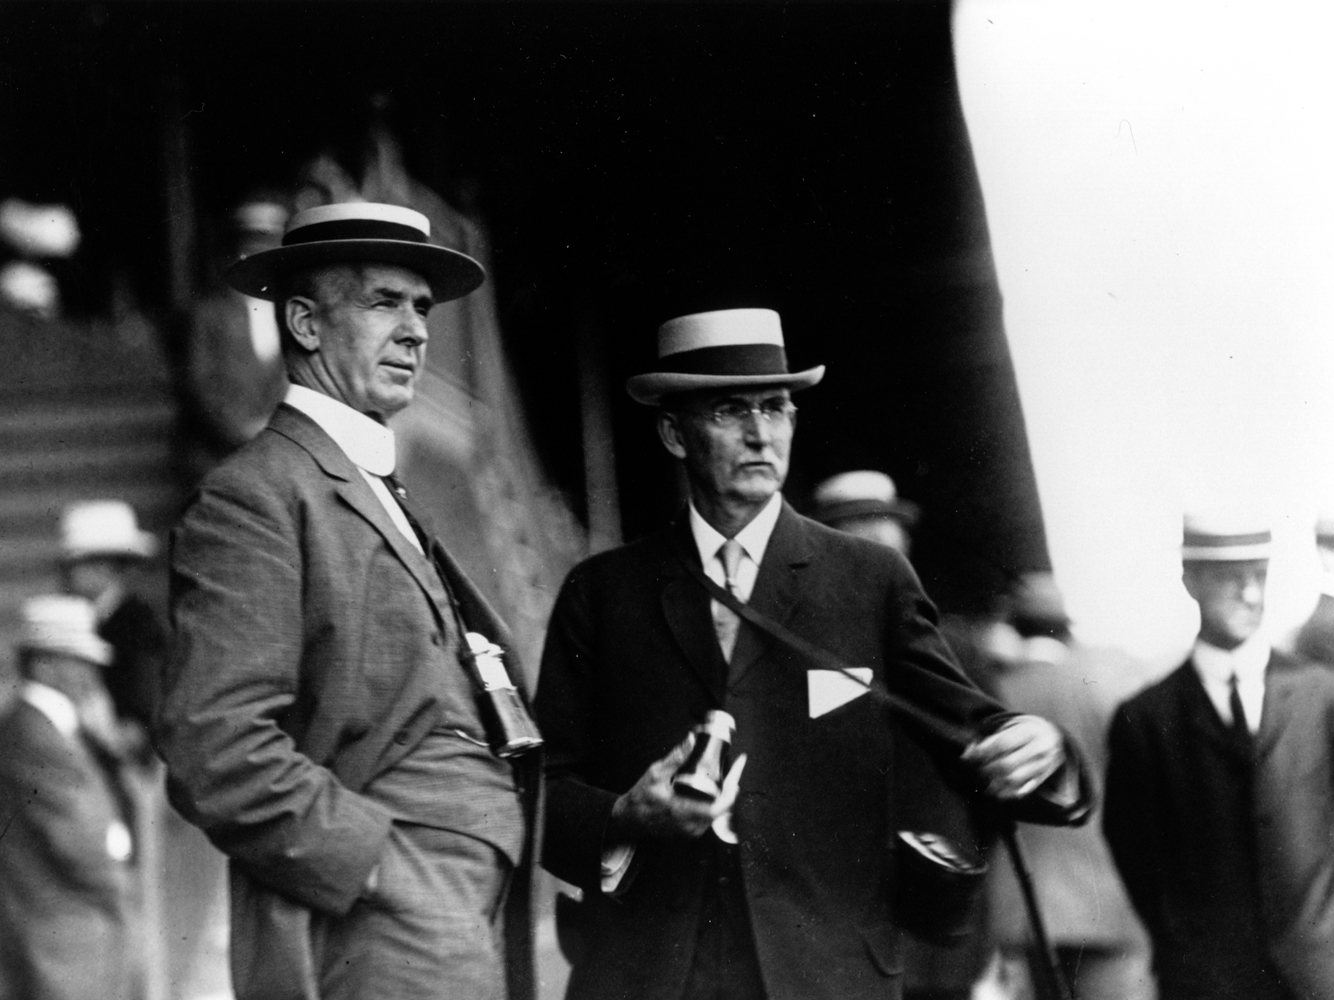 William P. Burch (on right) with an unidentified man (Keeneland Library Cook Collection/Museum Collection)